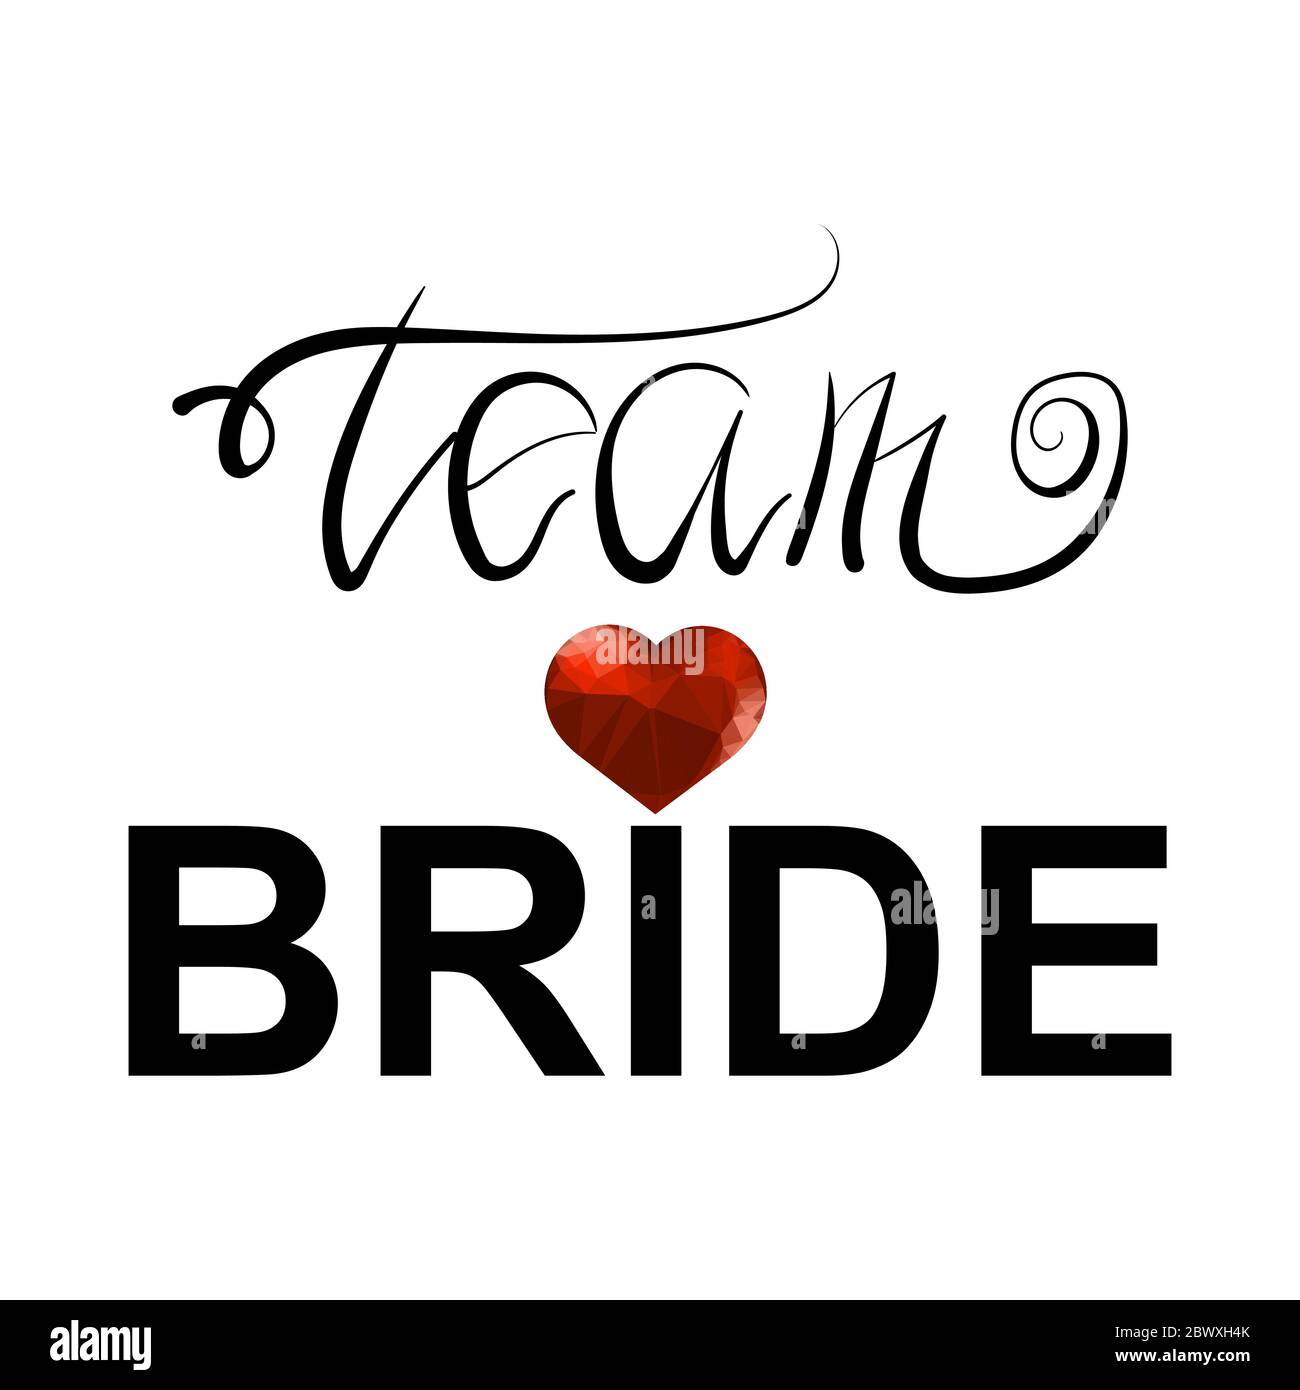 Bride Squad, Team Bride, Bride to be, bachelorette party | Greeting Card